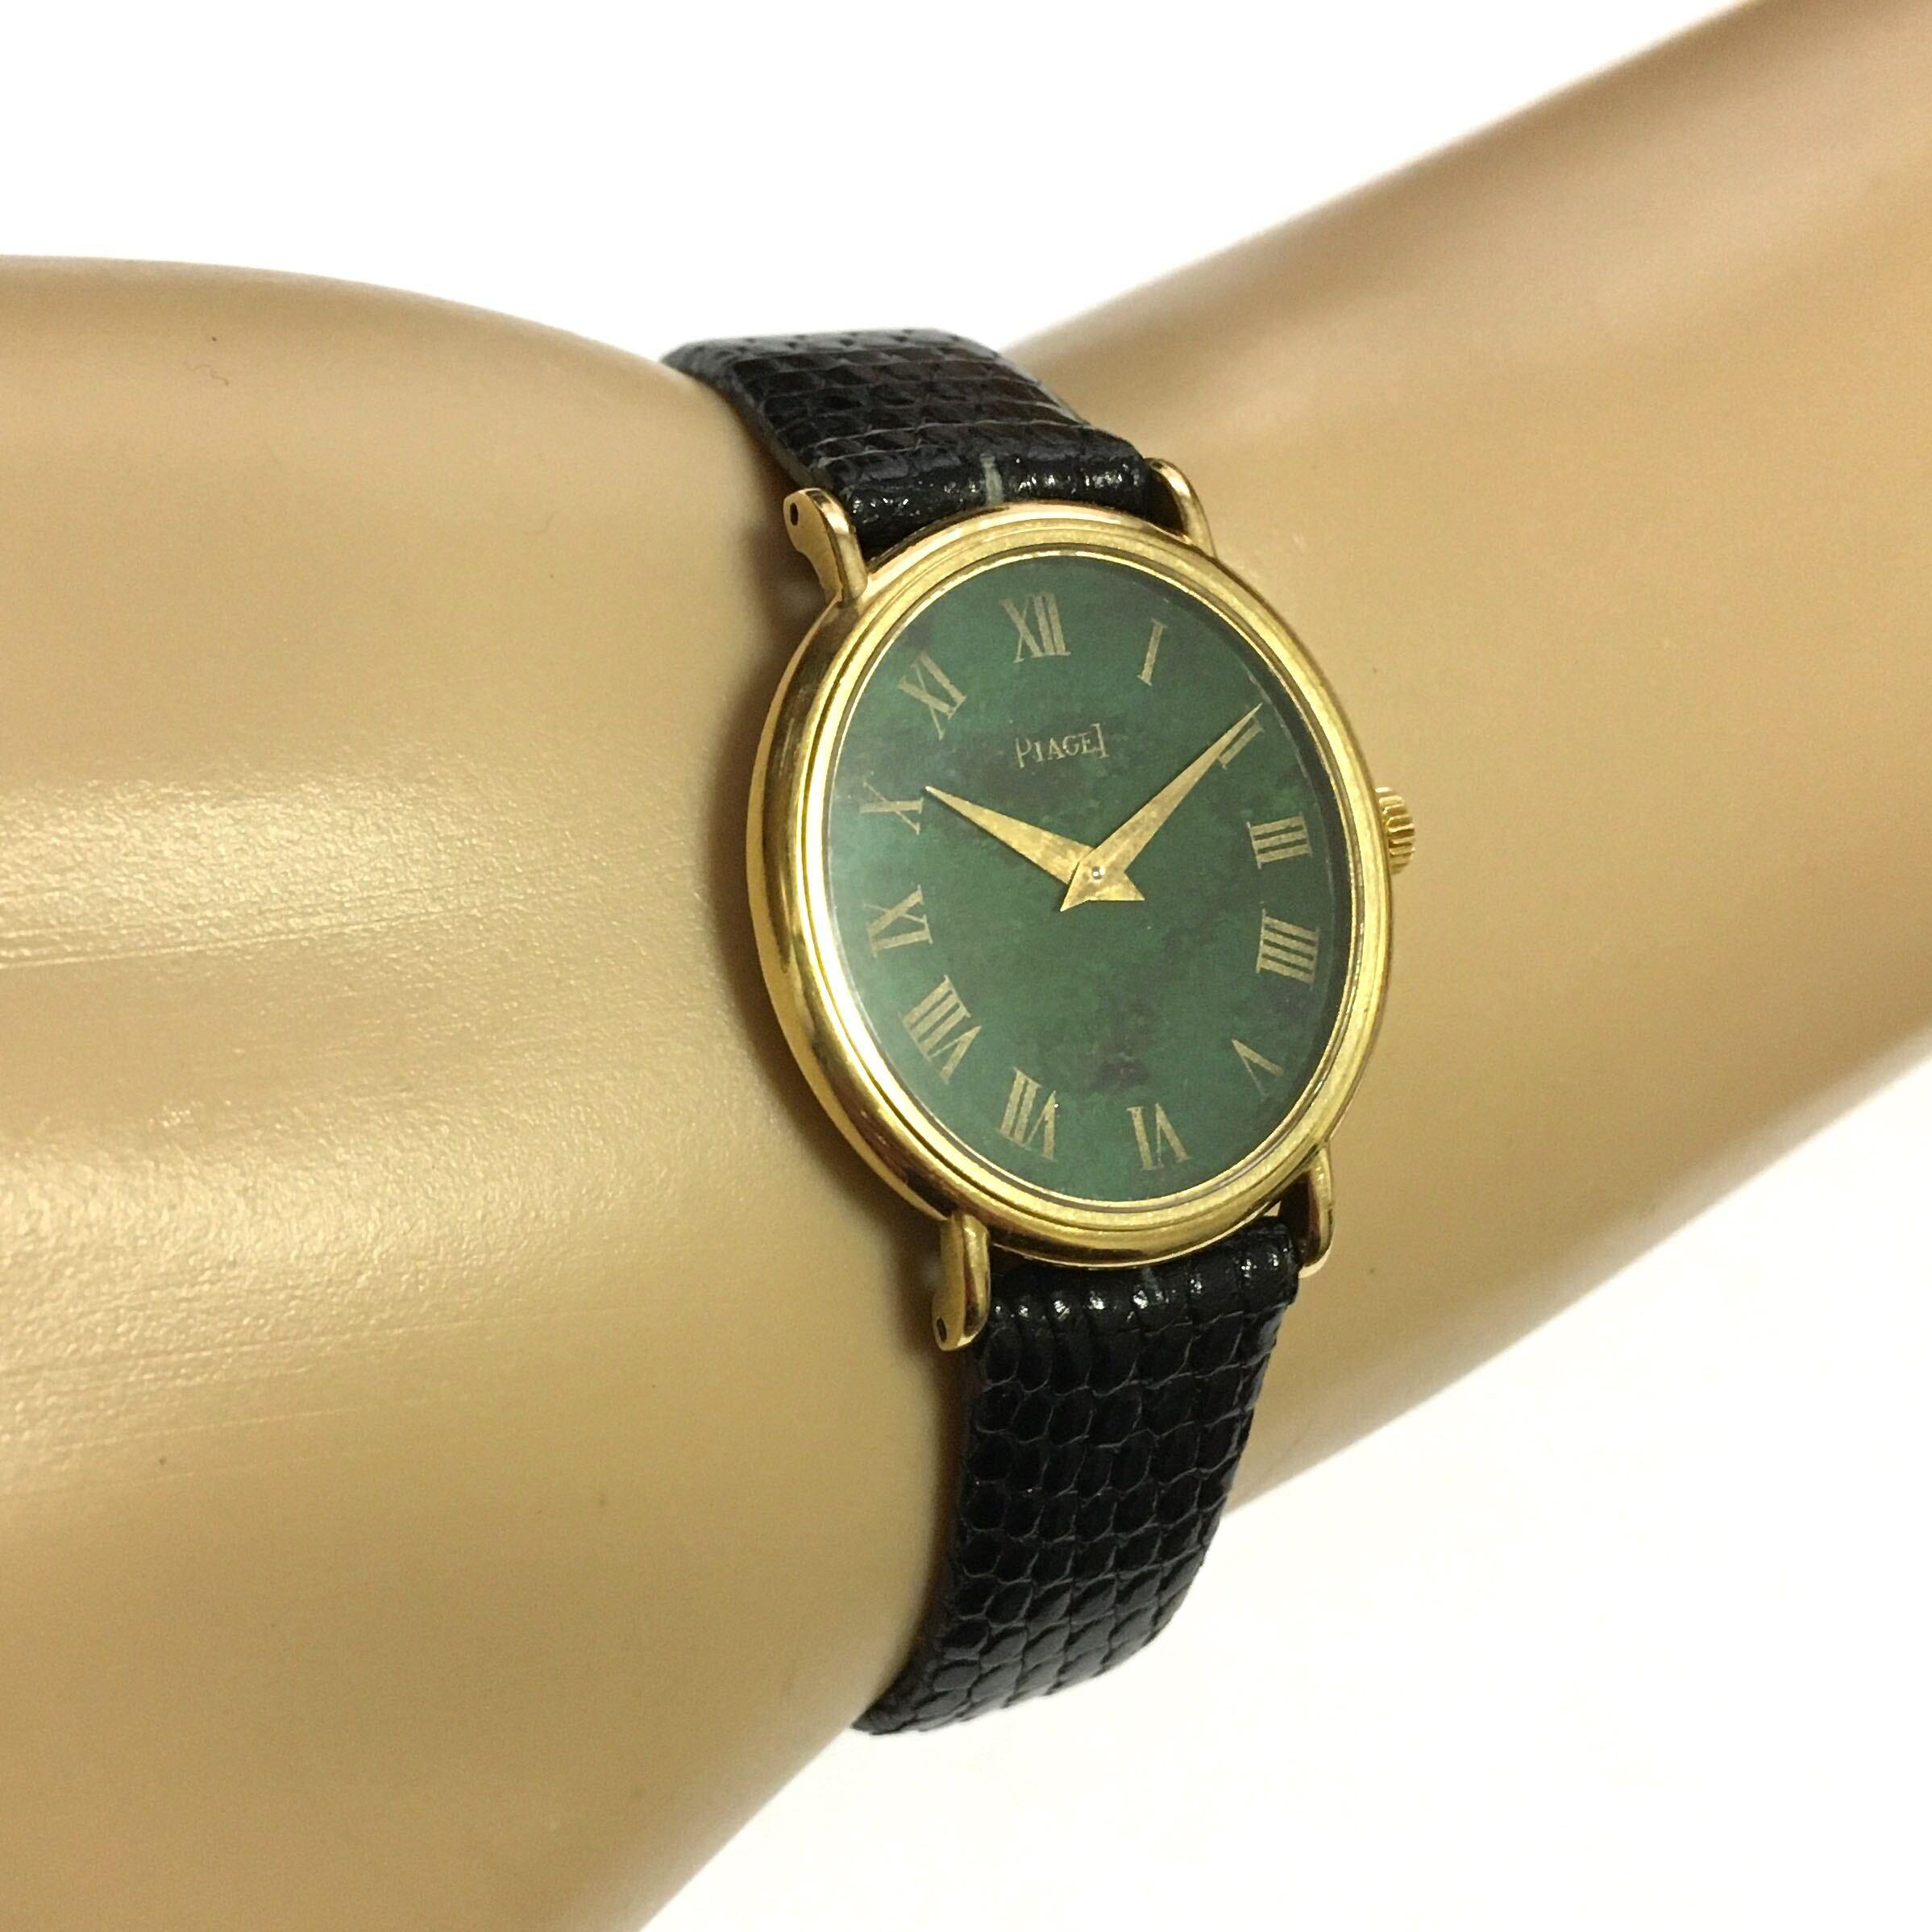 An 18 karat yellow gold and jade watch. Piaget. 24mm. Of mechanical movement, the oval jade dial with gold Roman numerals, with black leather band. Numbered 9822 1538510.